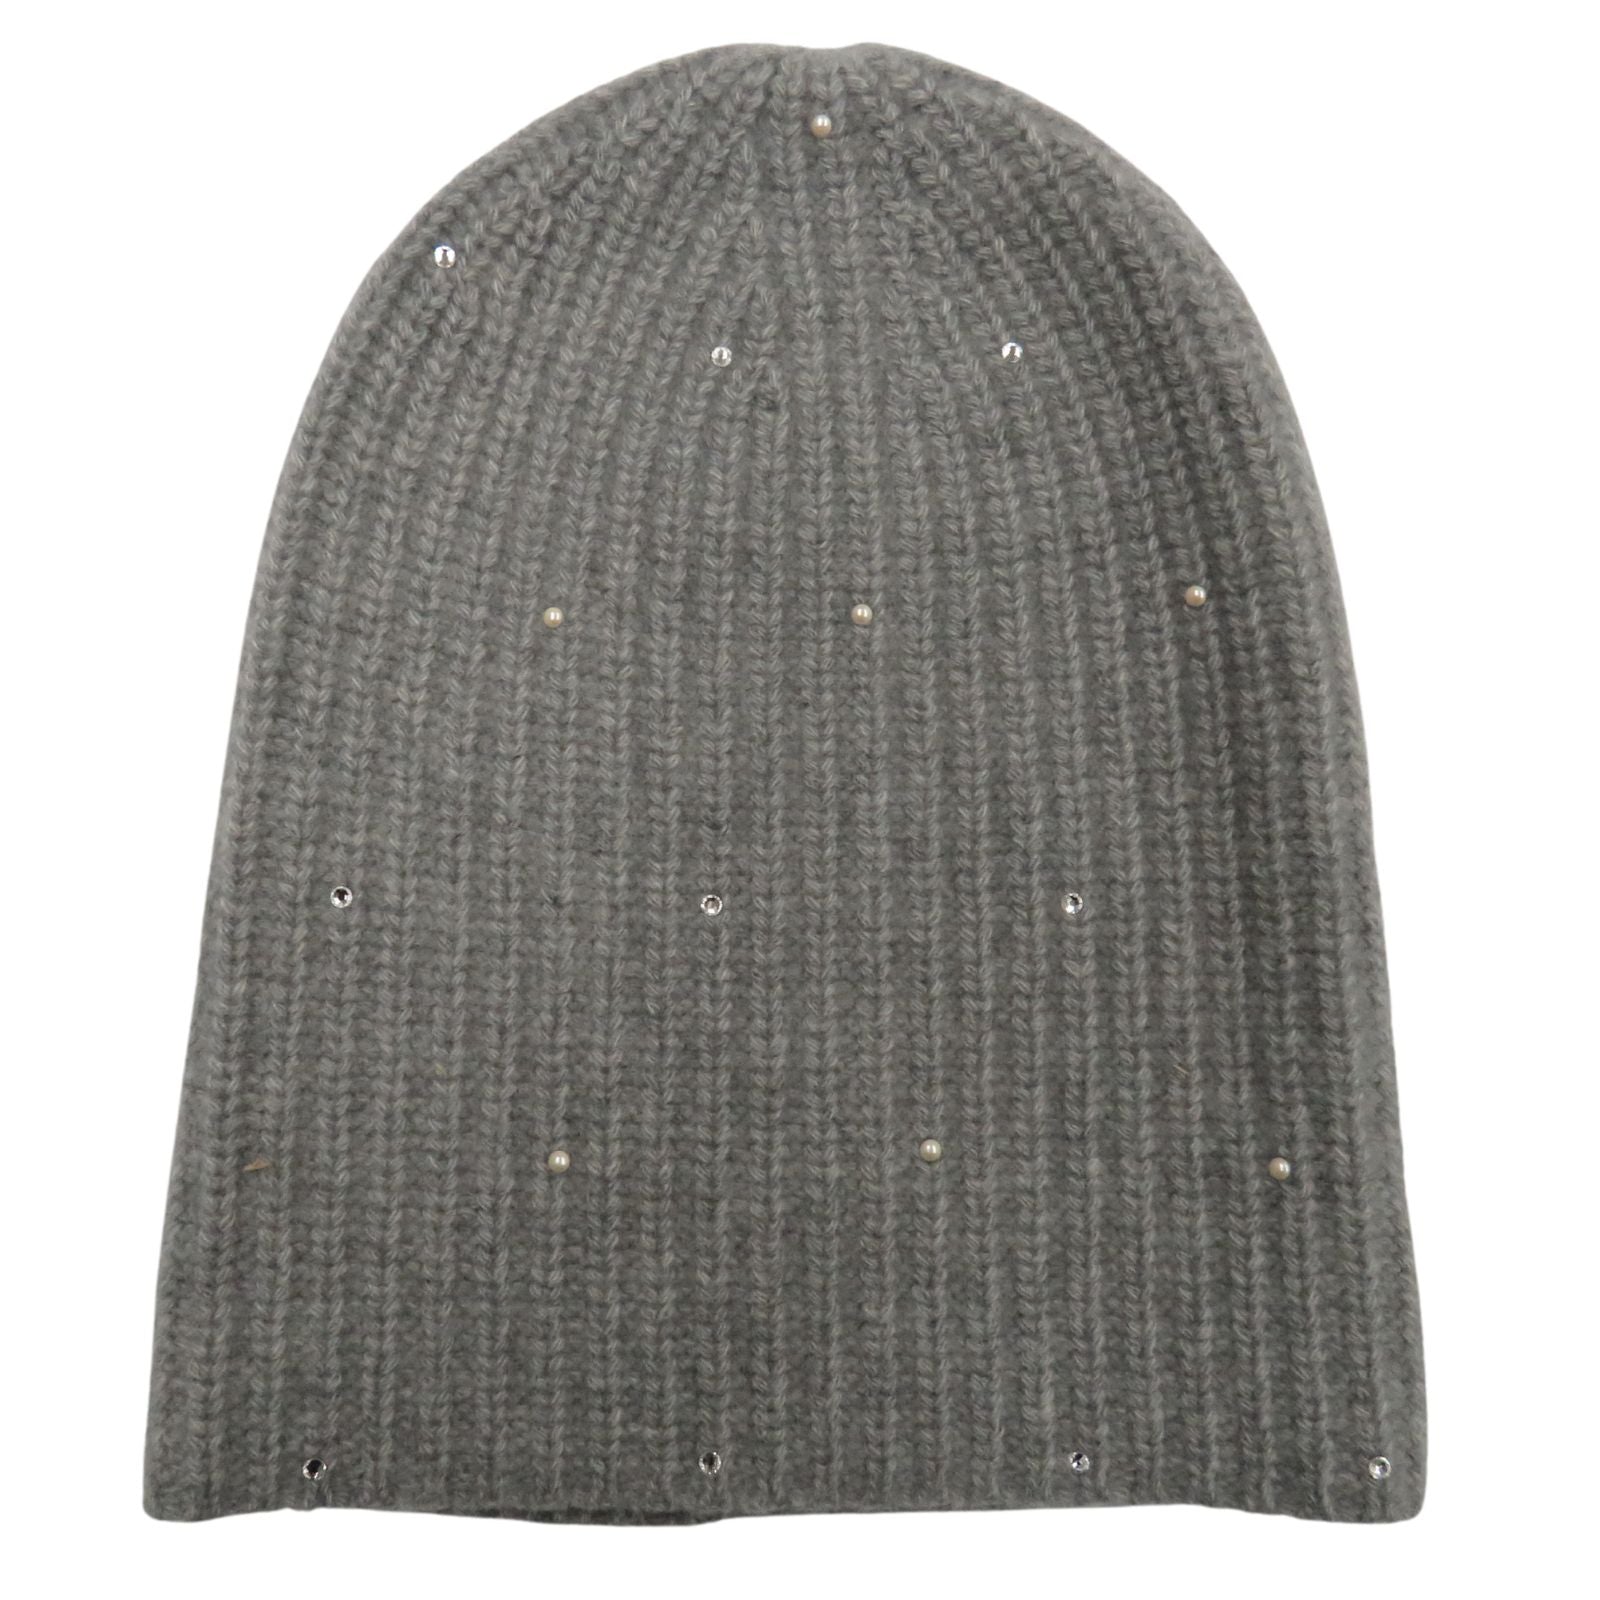 Rapper Hat, Light Heather Grey With Scattered Pearls